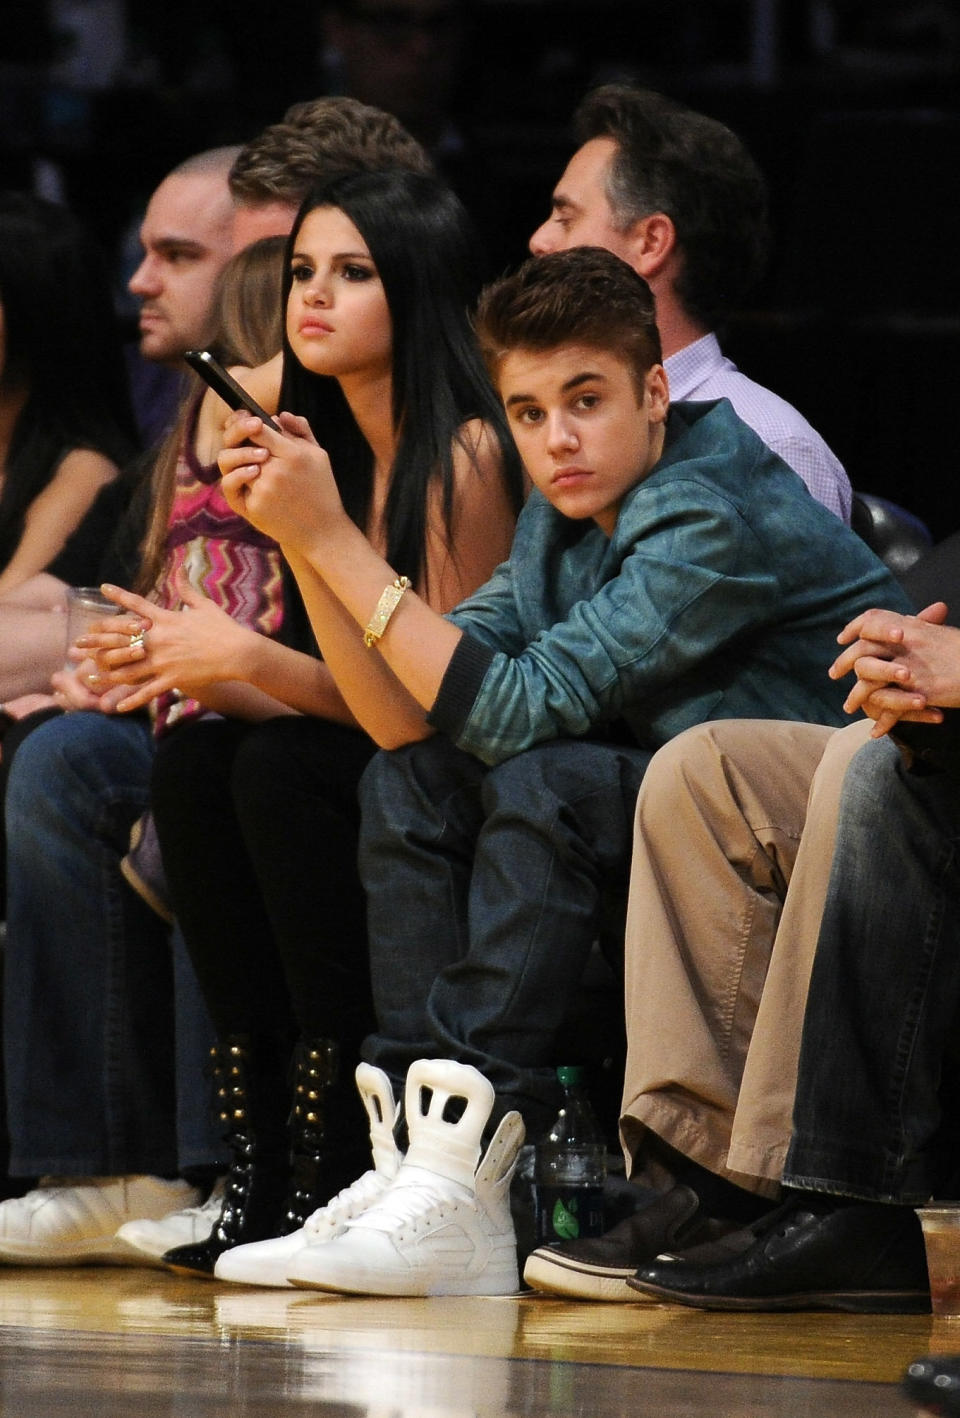 Justin Bieber and Selena Gomez <a href="http://www.huffingtonpost.com/2013/01/04/justin-bieber-selena-gomez-split-break-up-again-new-years_n_2408778.html" target="_blank">split for the second time</a> just after New Year's. Teenyboppers everywhere sobbed. 